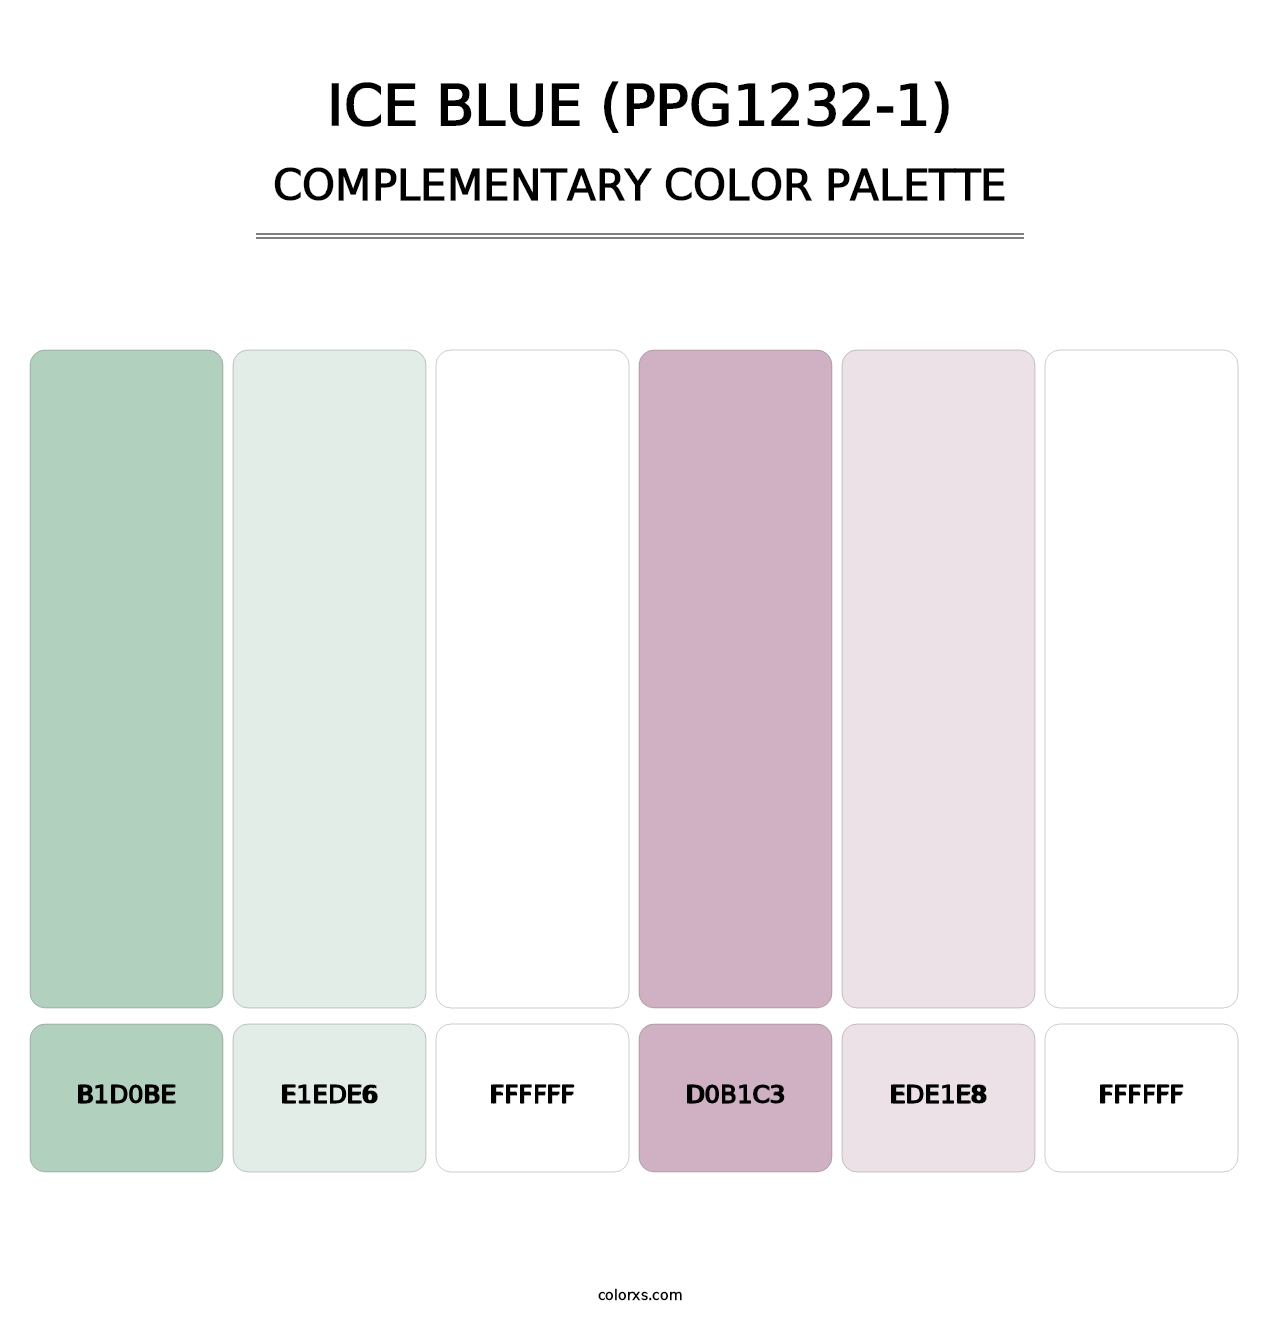 Ice Blue (PPG1232-1) - Complementary Color Palette